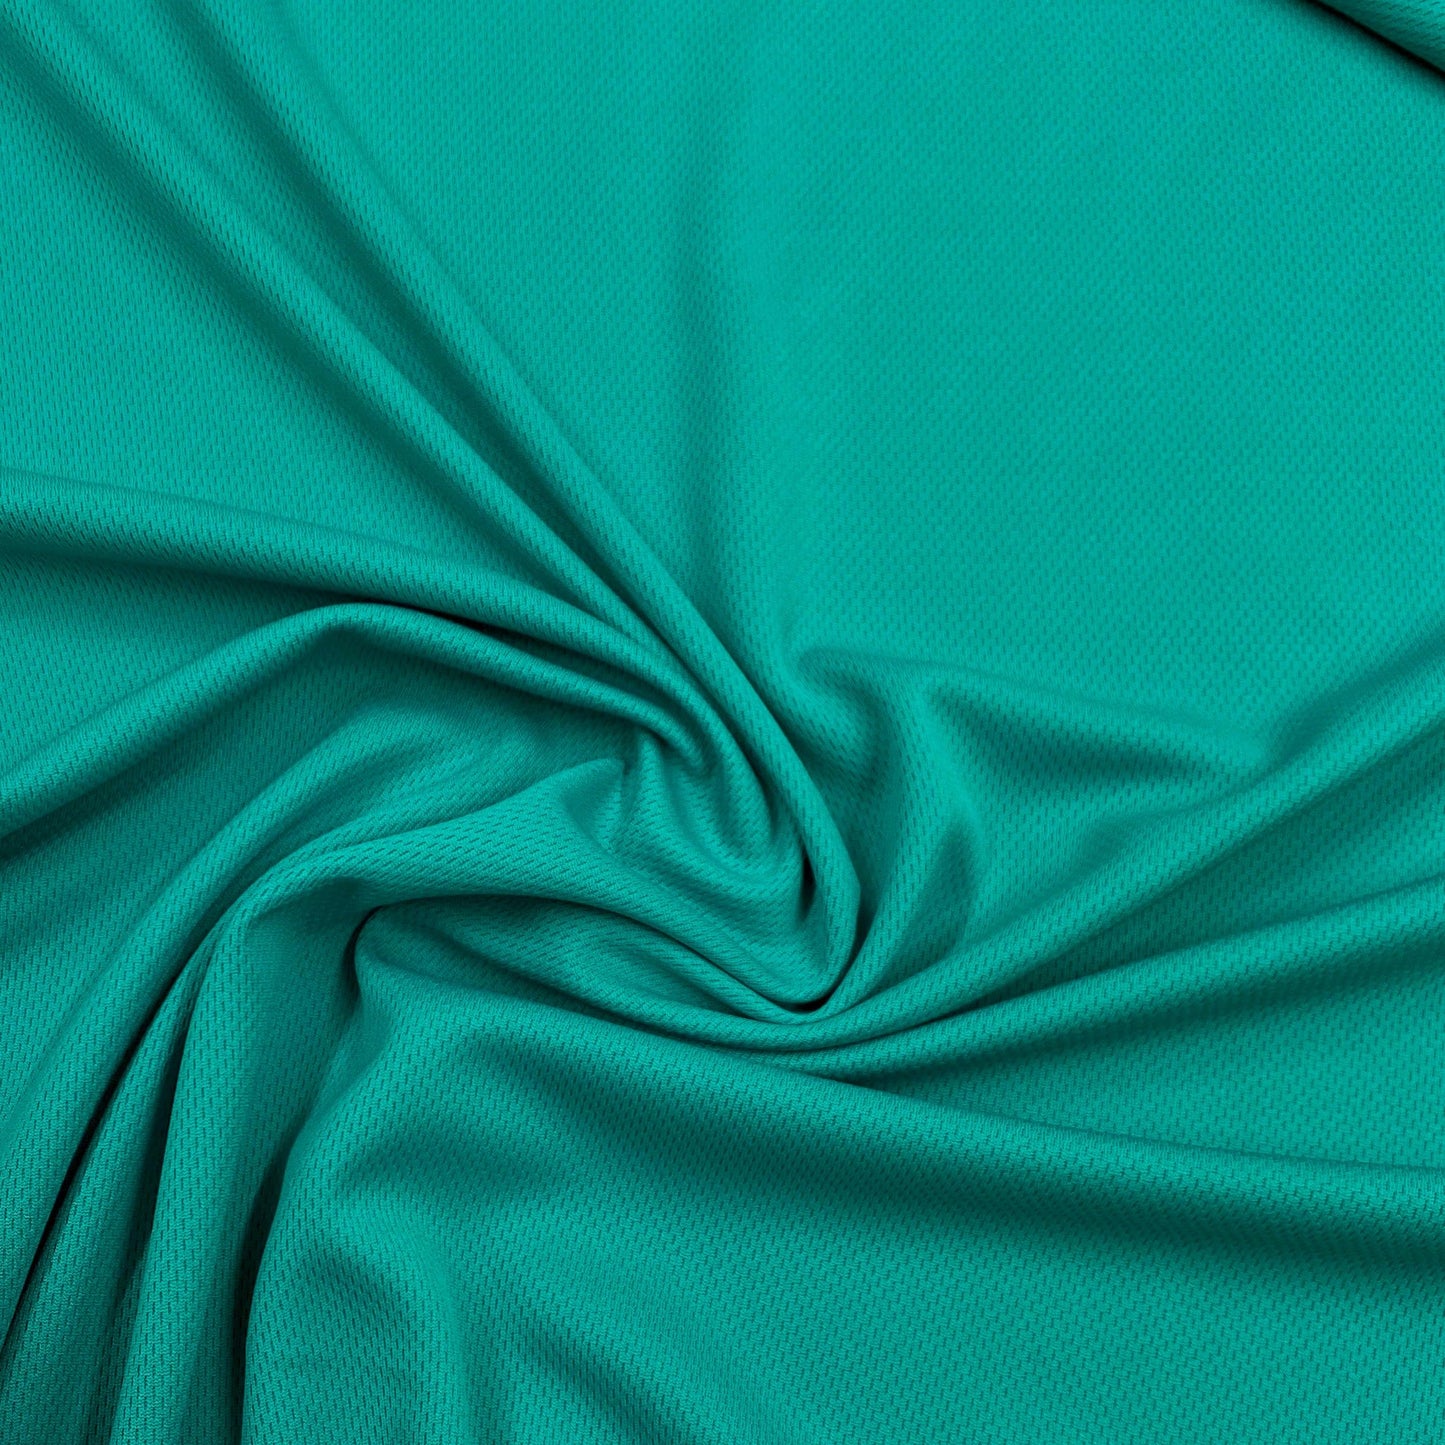 Teal Polyester Athletic Wicking Jersey Fabric - Nature's Fabrics